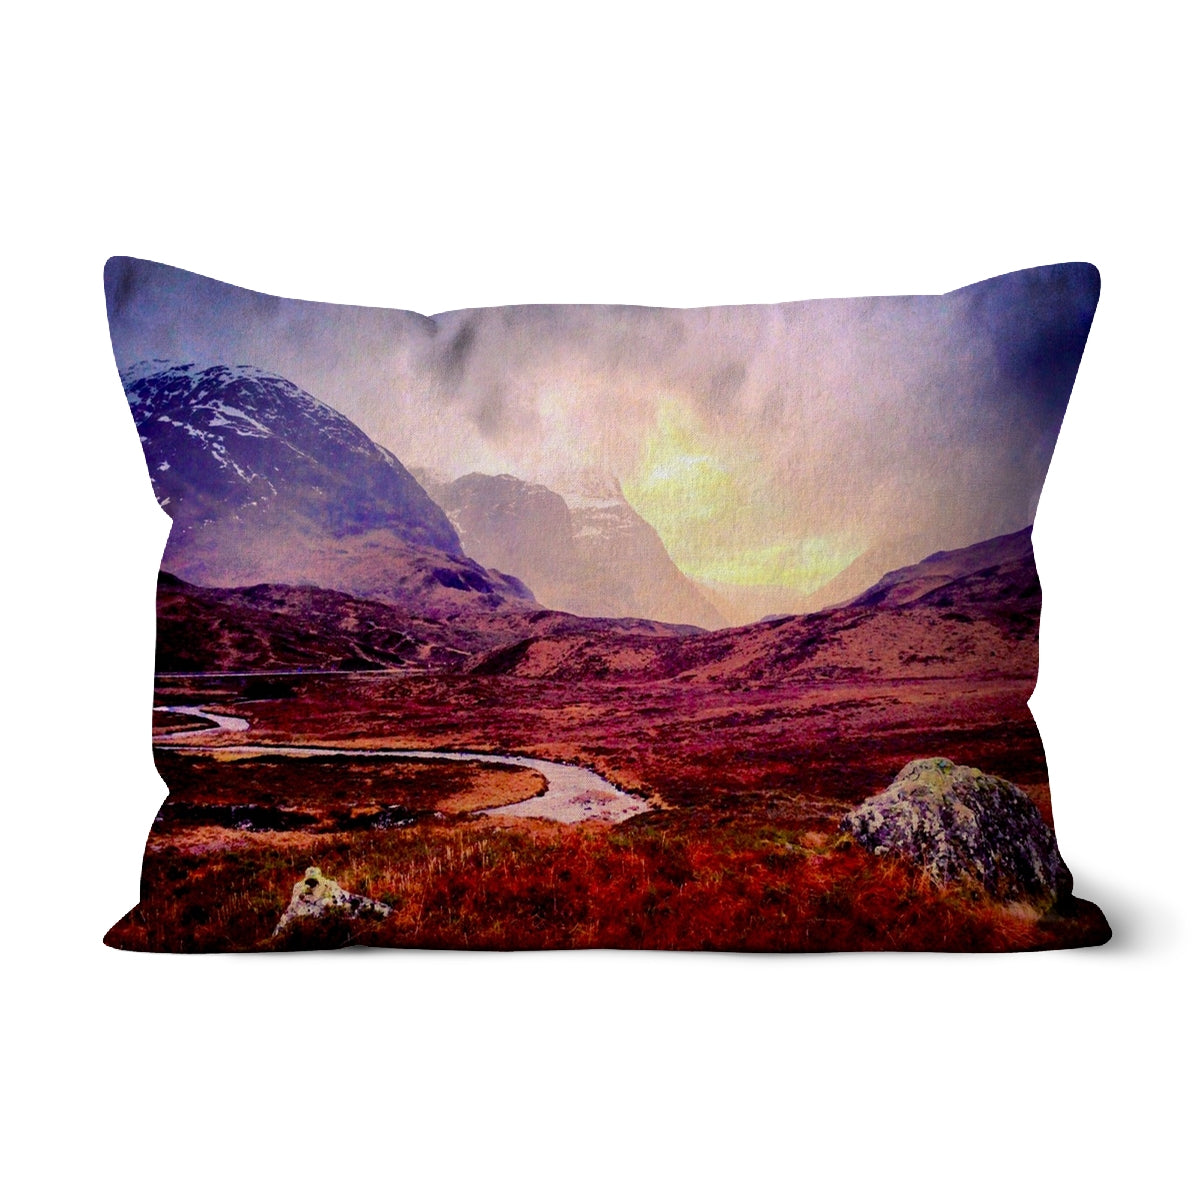 A Brooding Glencoe Art Gifts Cushion-Cushions-Glencoe Art Gallery-Faux Suede-19"x13"-Paintings, Prints, Homeware, Art Gifts From Scotland By Scottish Artist Kevin Hunter